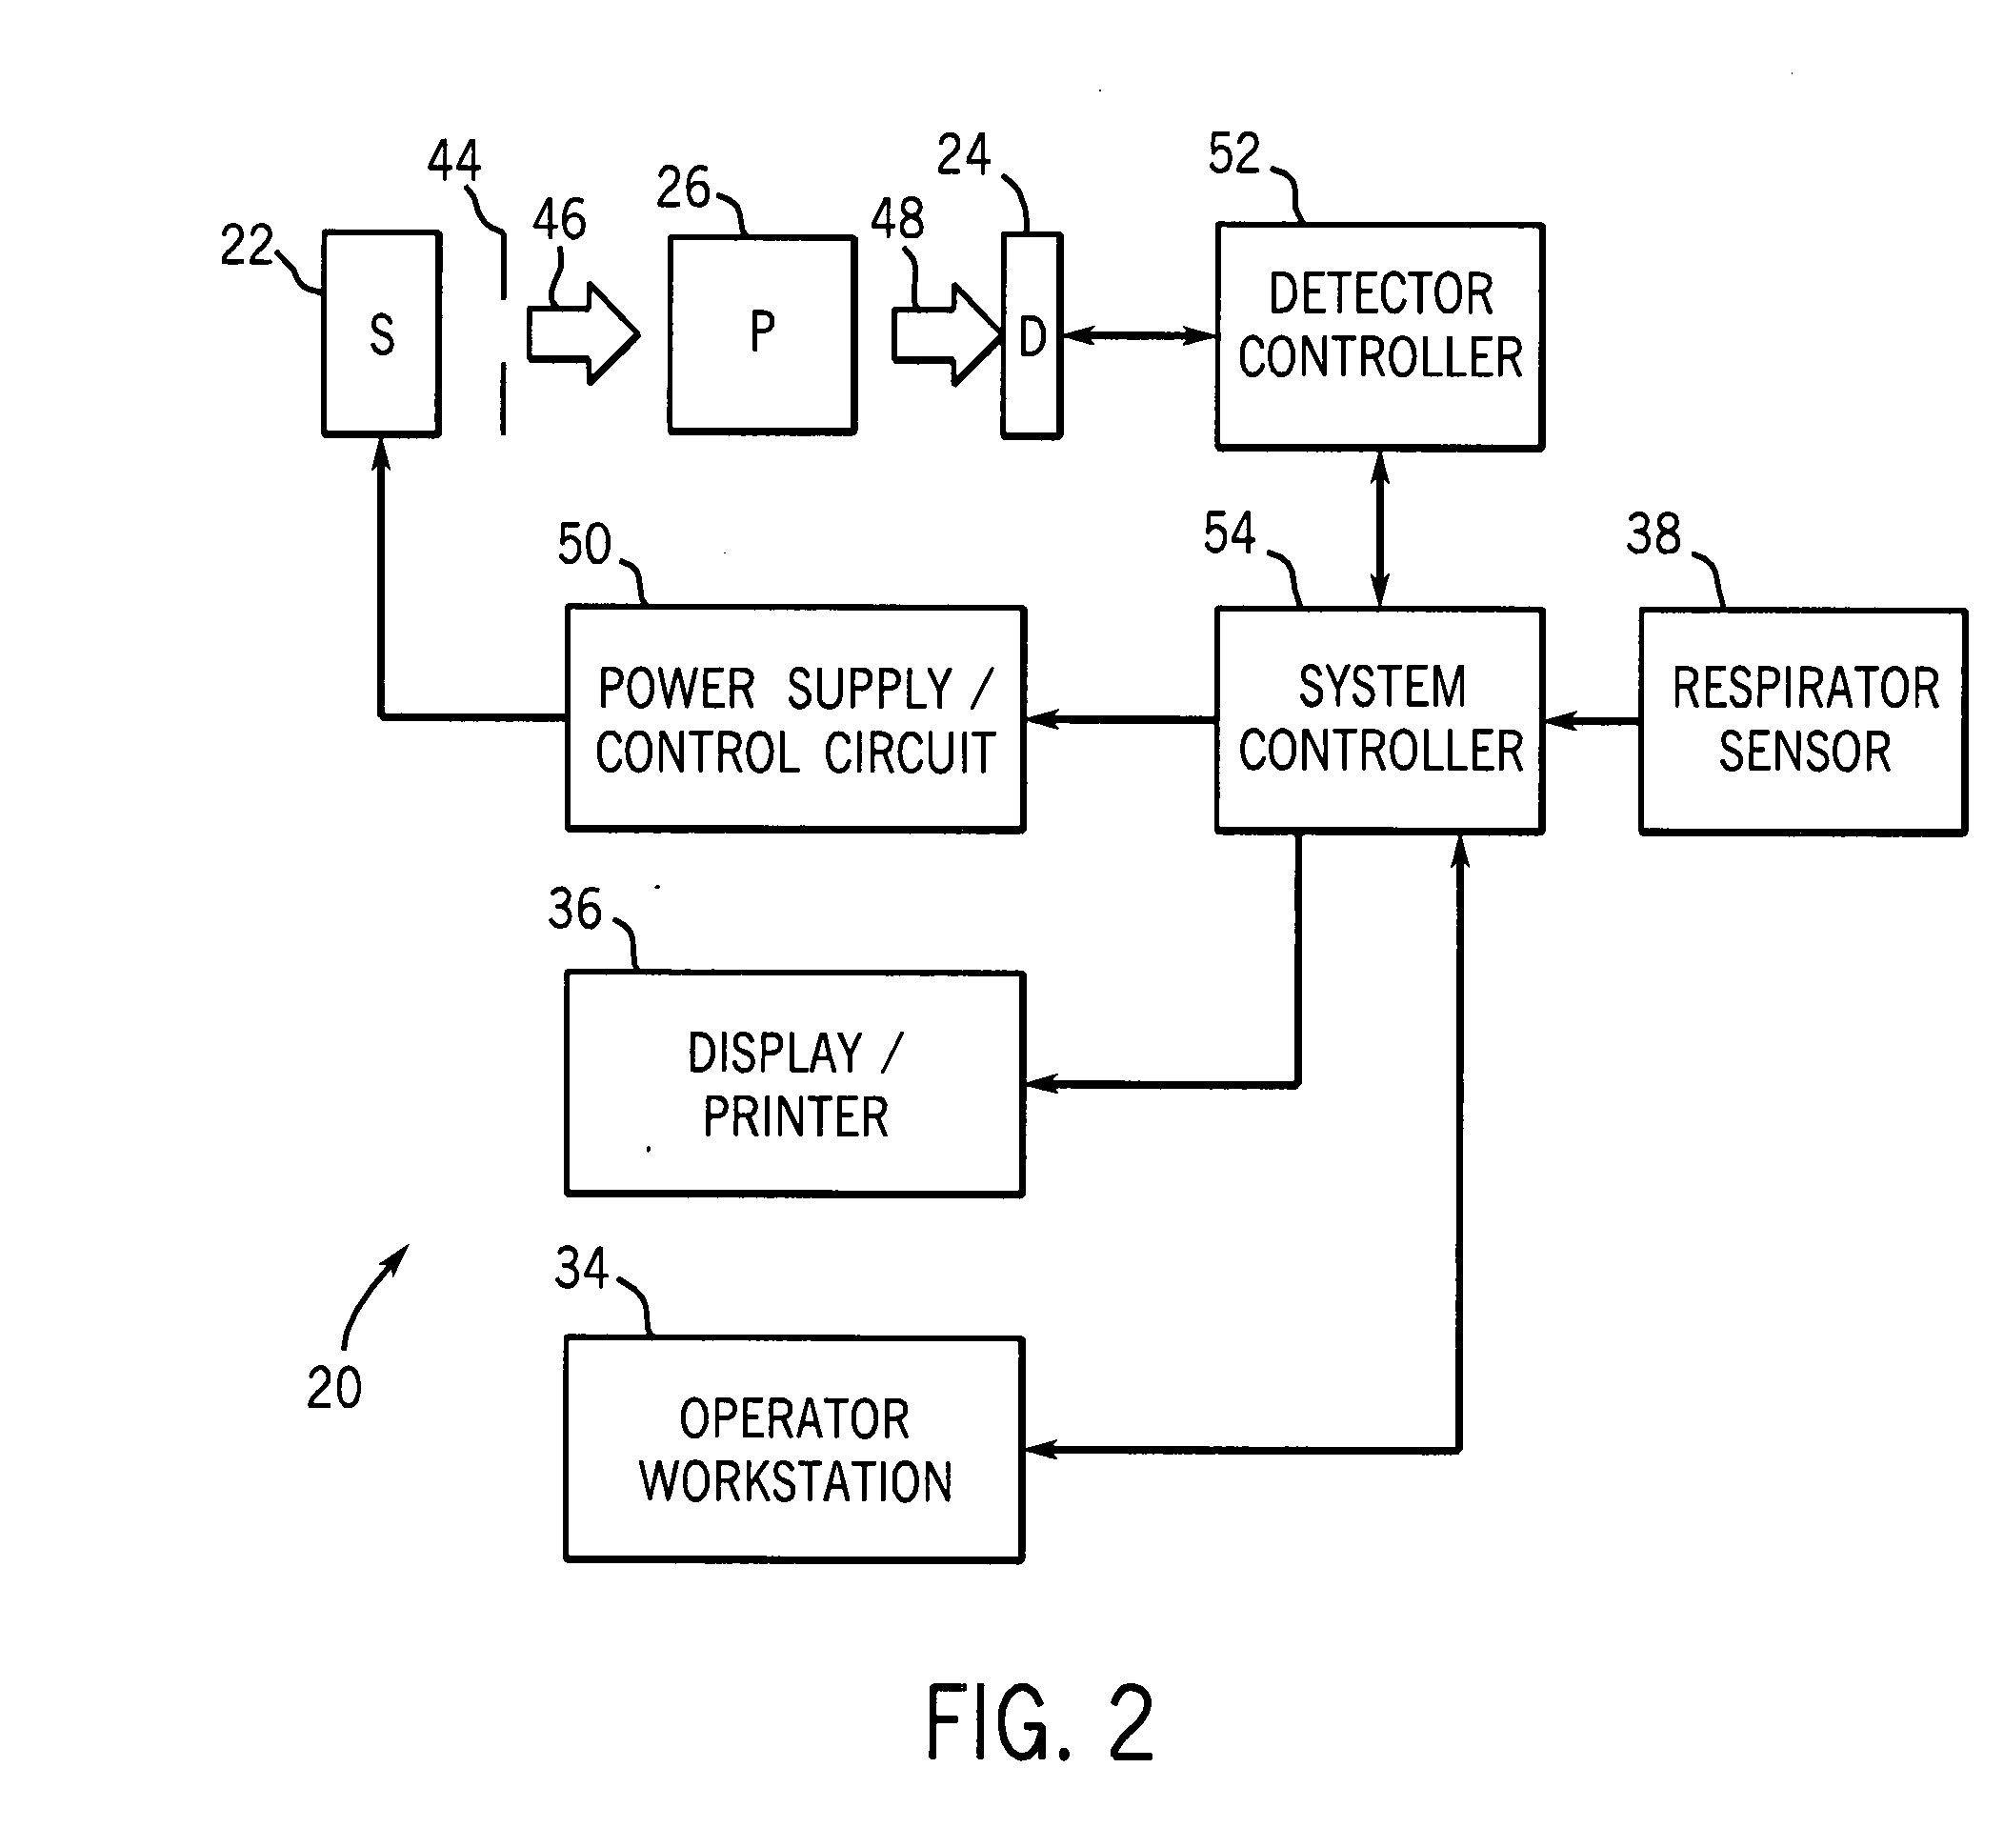 Image acquisition and processing chain for dual-energy radiography using a portable flat panel detector